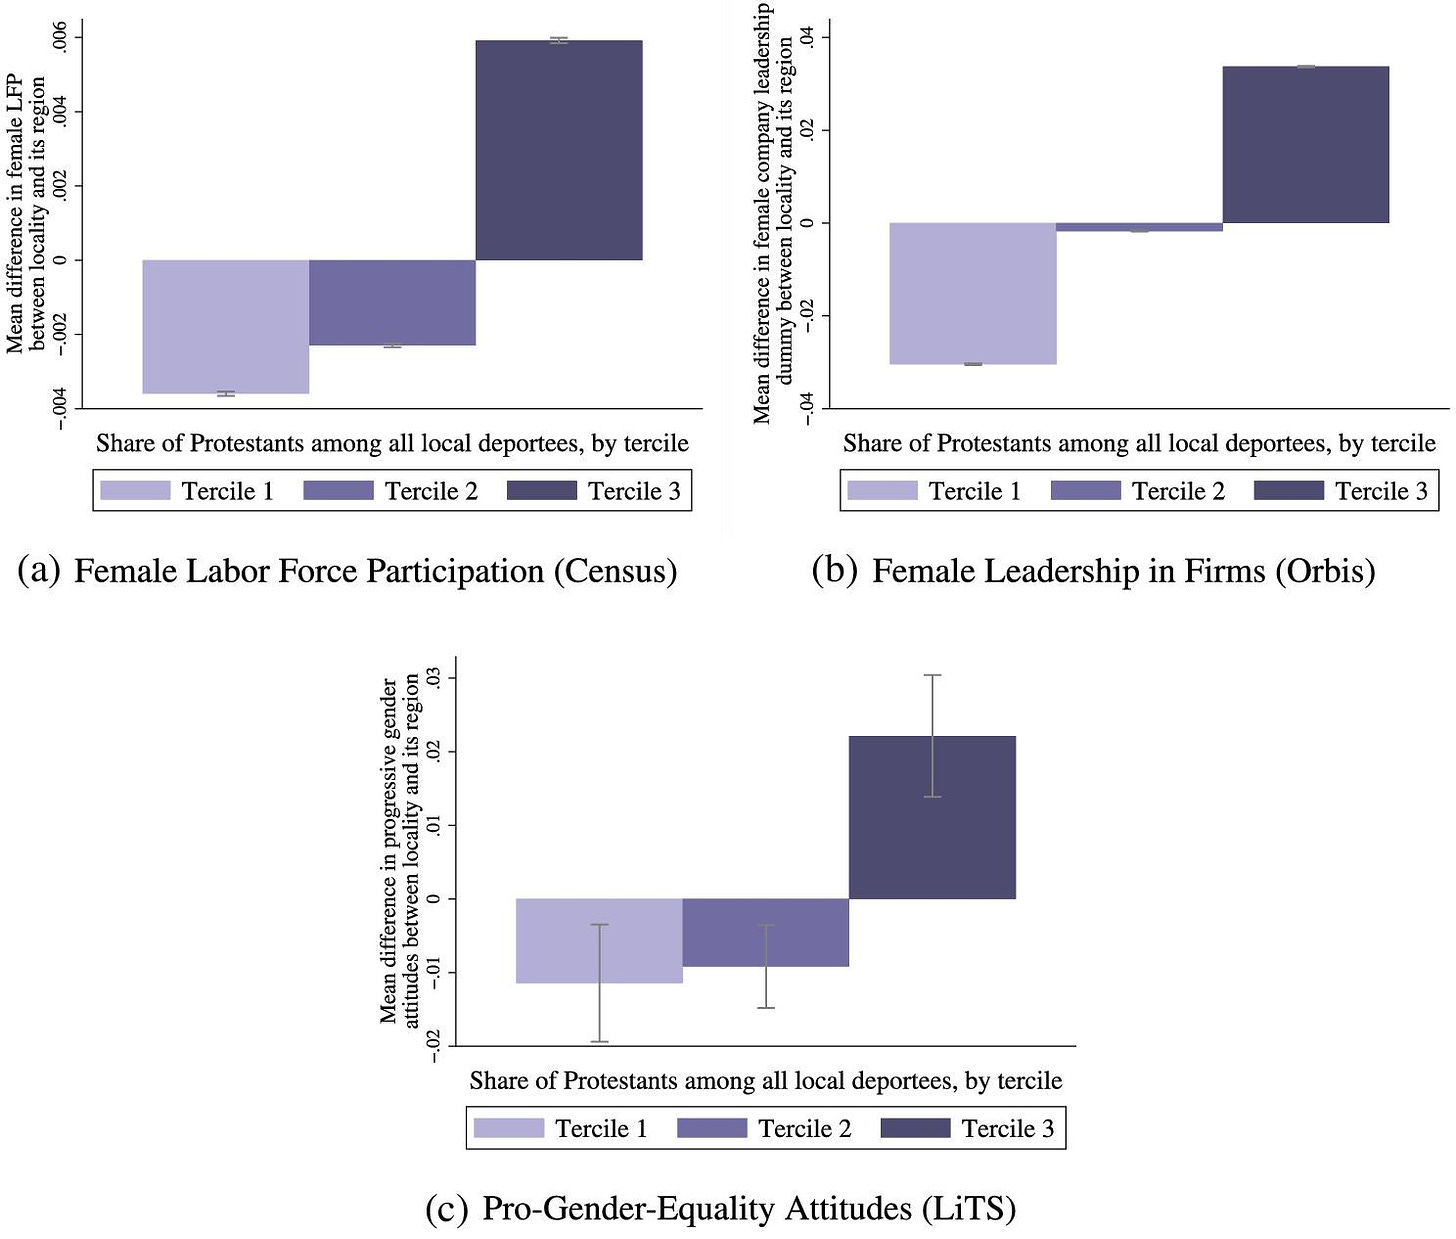 Mean difference in gender outcomes between the locality and its region, by tercile of the share of Protestant deportees in the locality. The figure presents the mean difference between the main outcome variables in the locality and its region, by the tercile of the share of Protestants among all deportees in the locality. The mean difference between the share of Protestants among all deportees in the locality and in its region is $-14$ percentage points in the first tercile, 0 in the second tercile, and $+14$ percentage points in the third tercile.